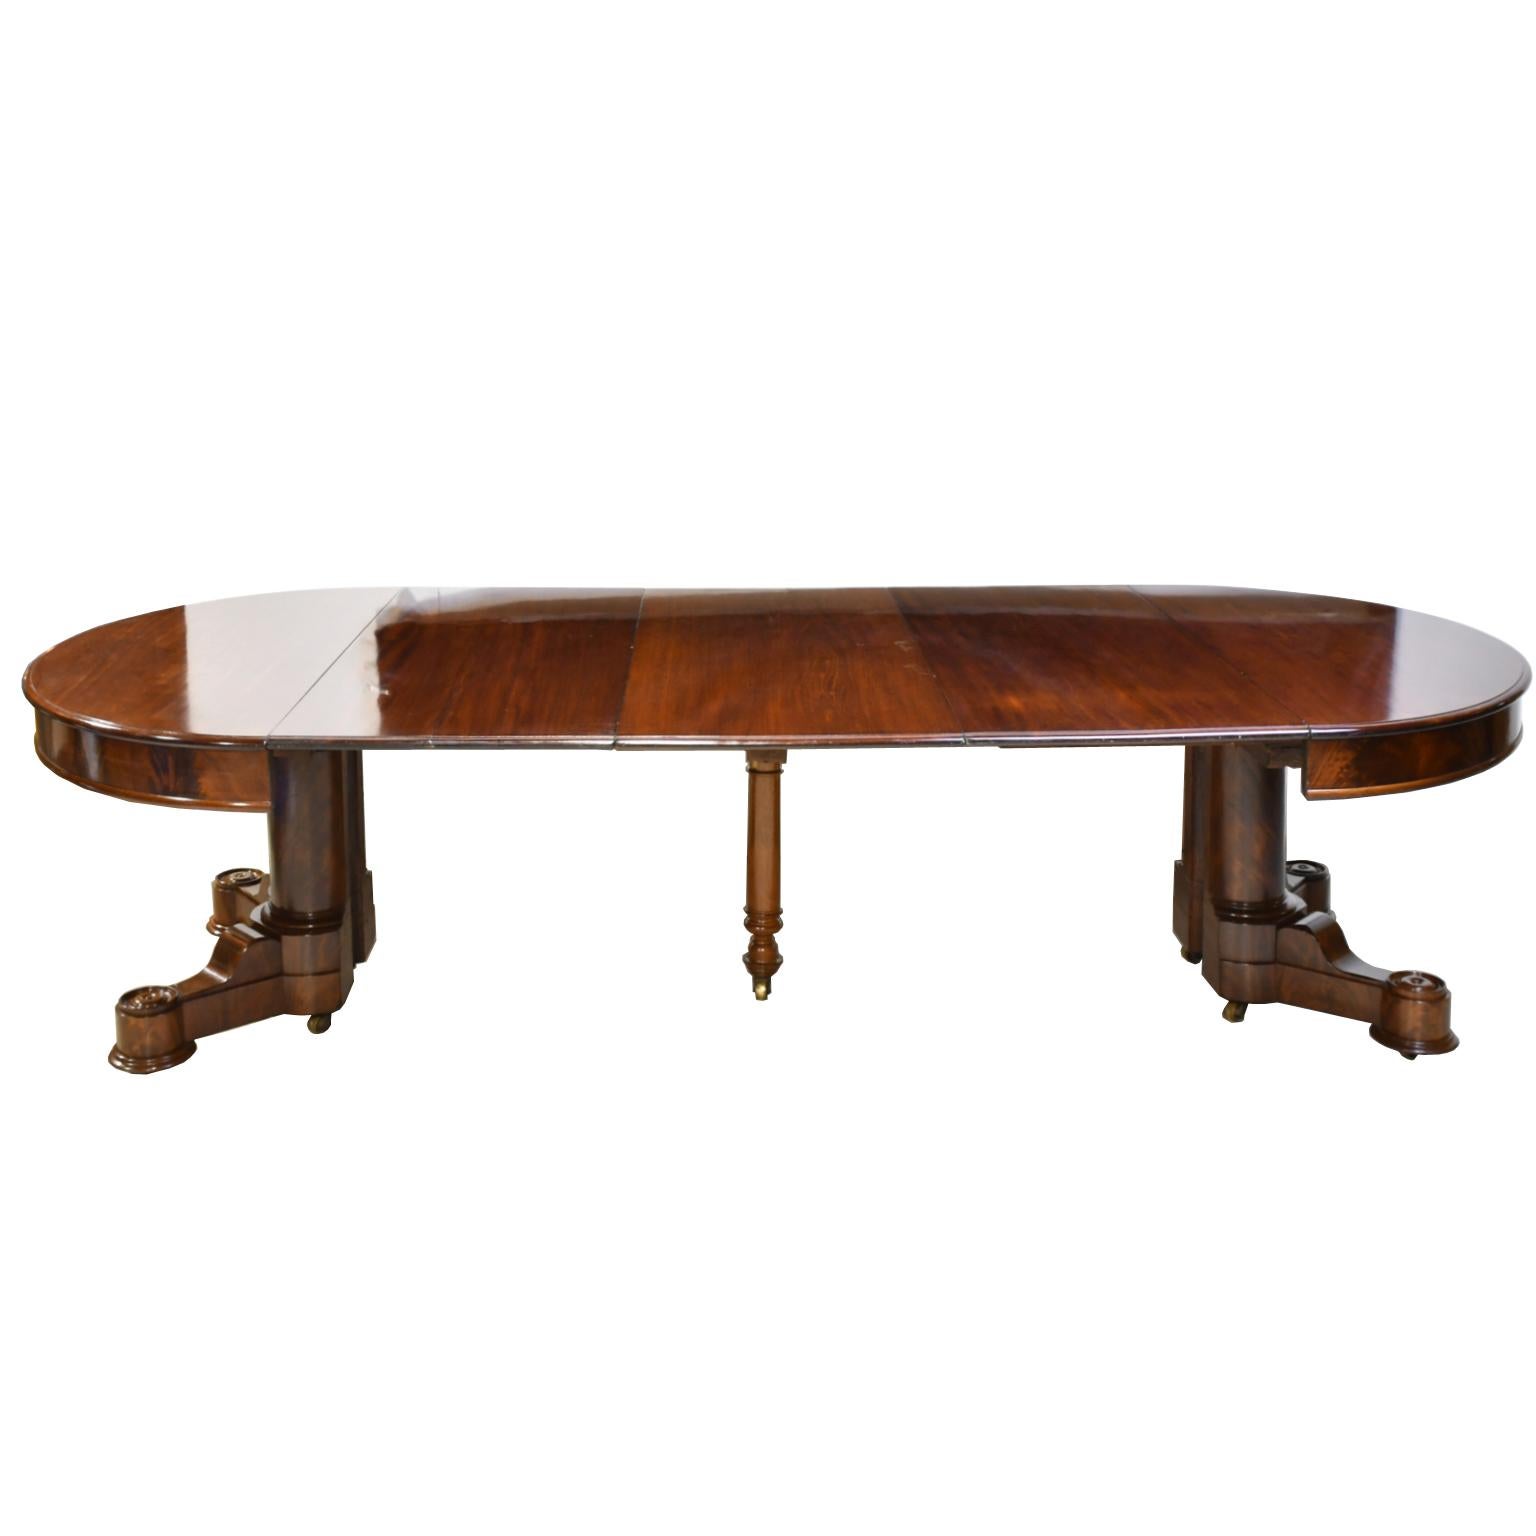 American Empire Oval Extension Dining Table in Mahogany with Pedestal Base 6